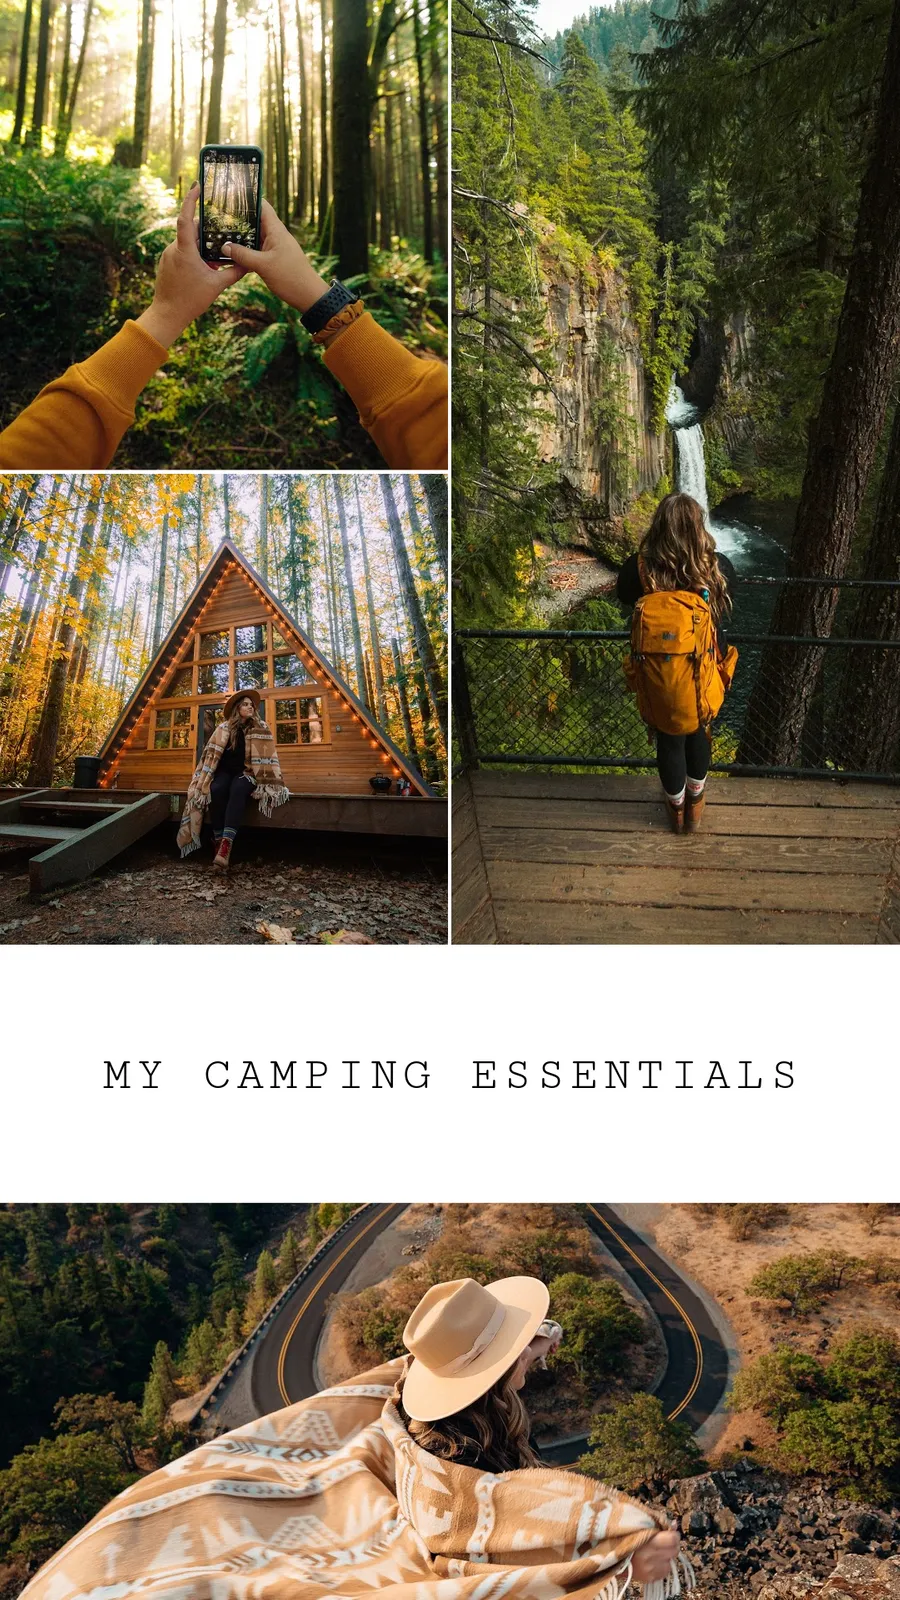 My Camping Essentials travel-brochures template